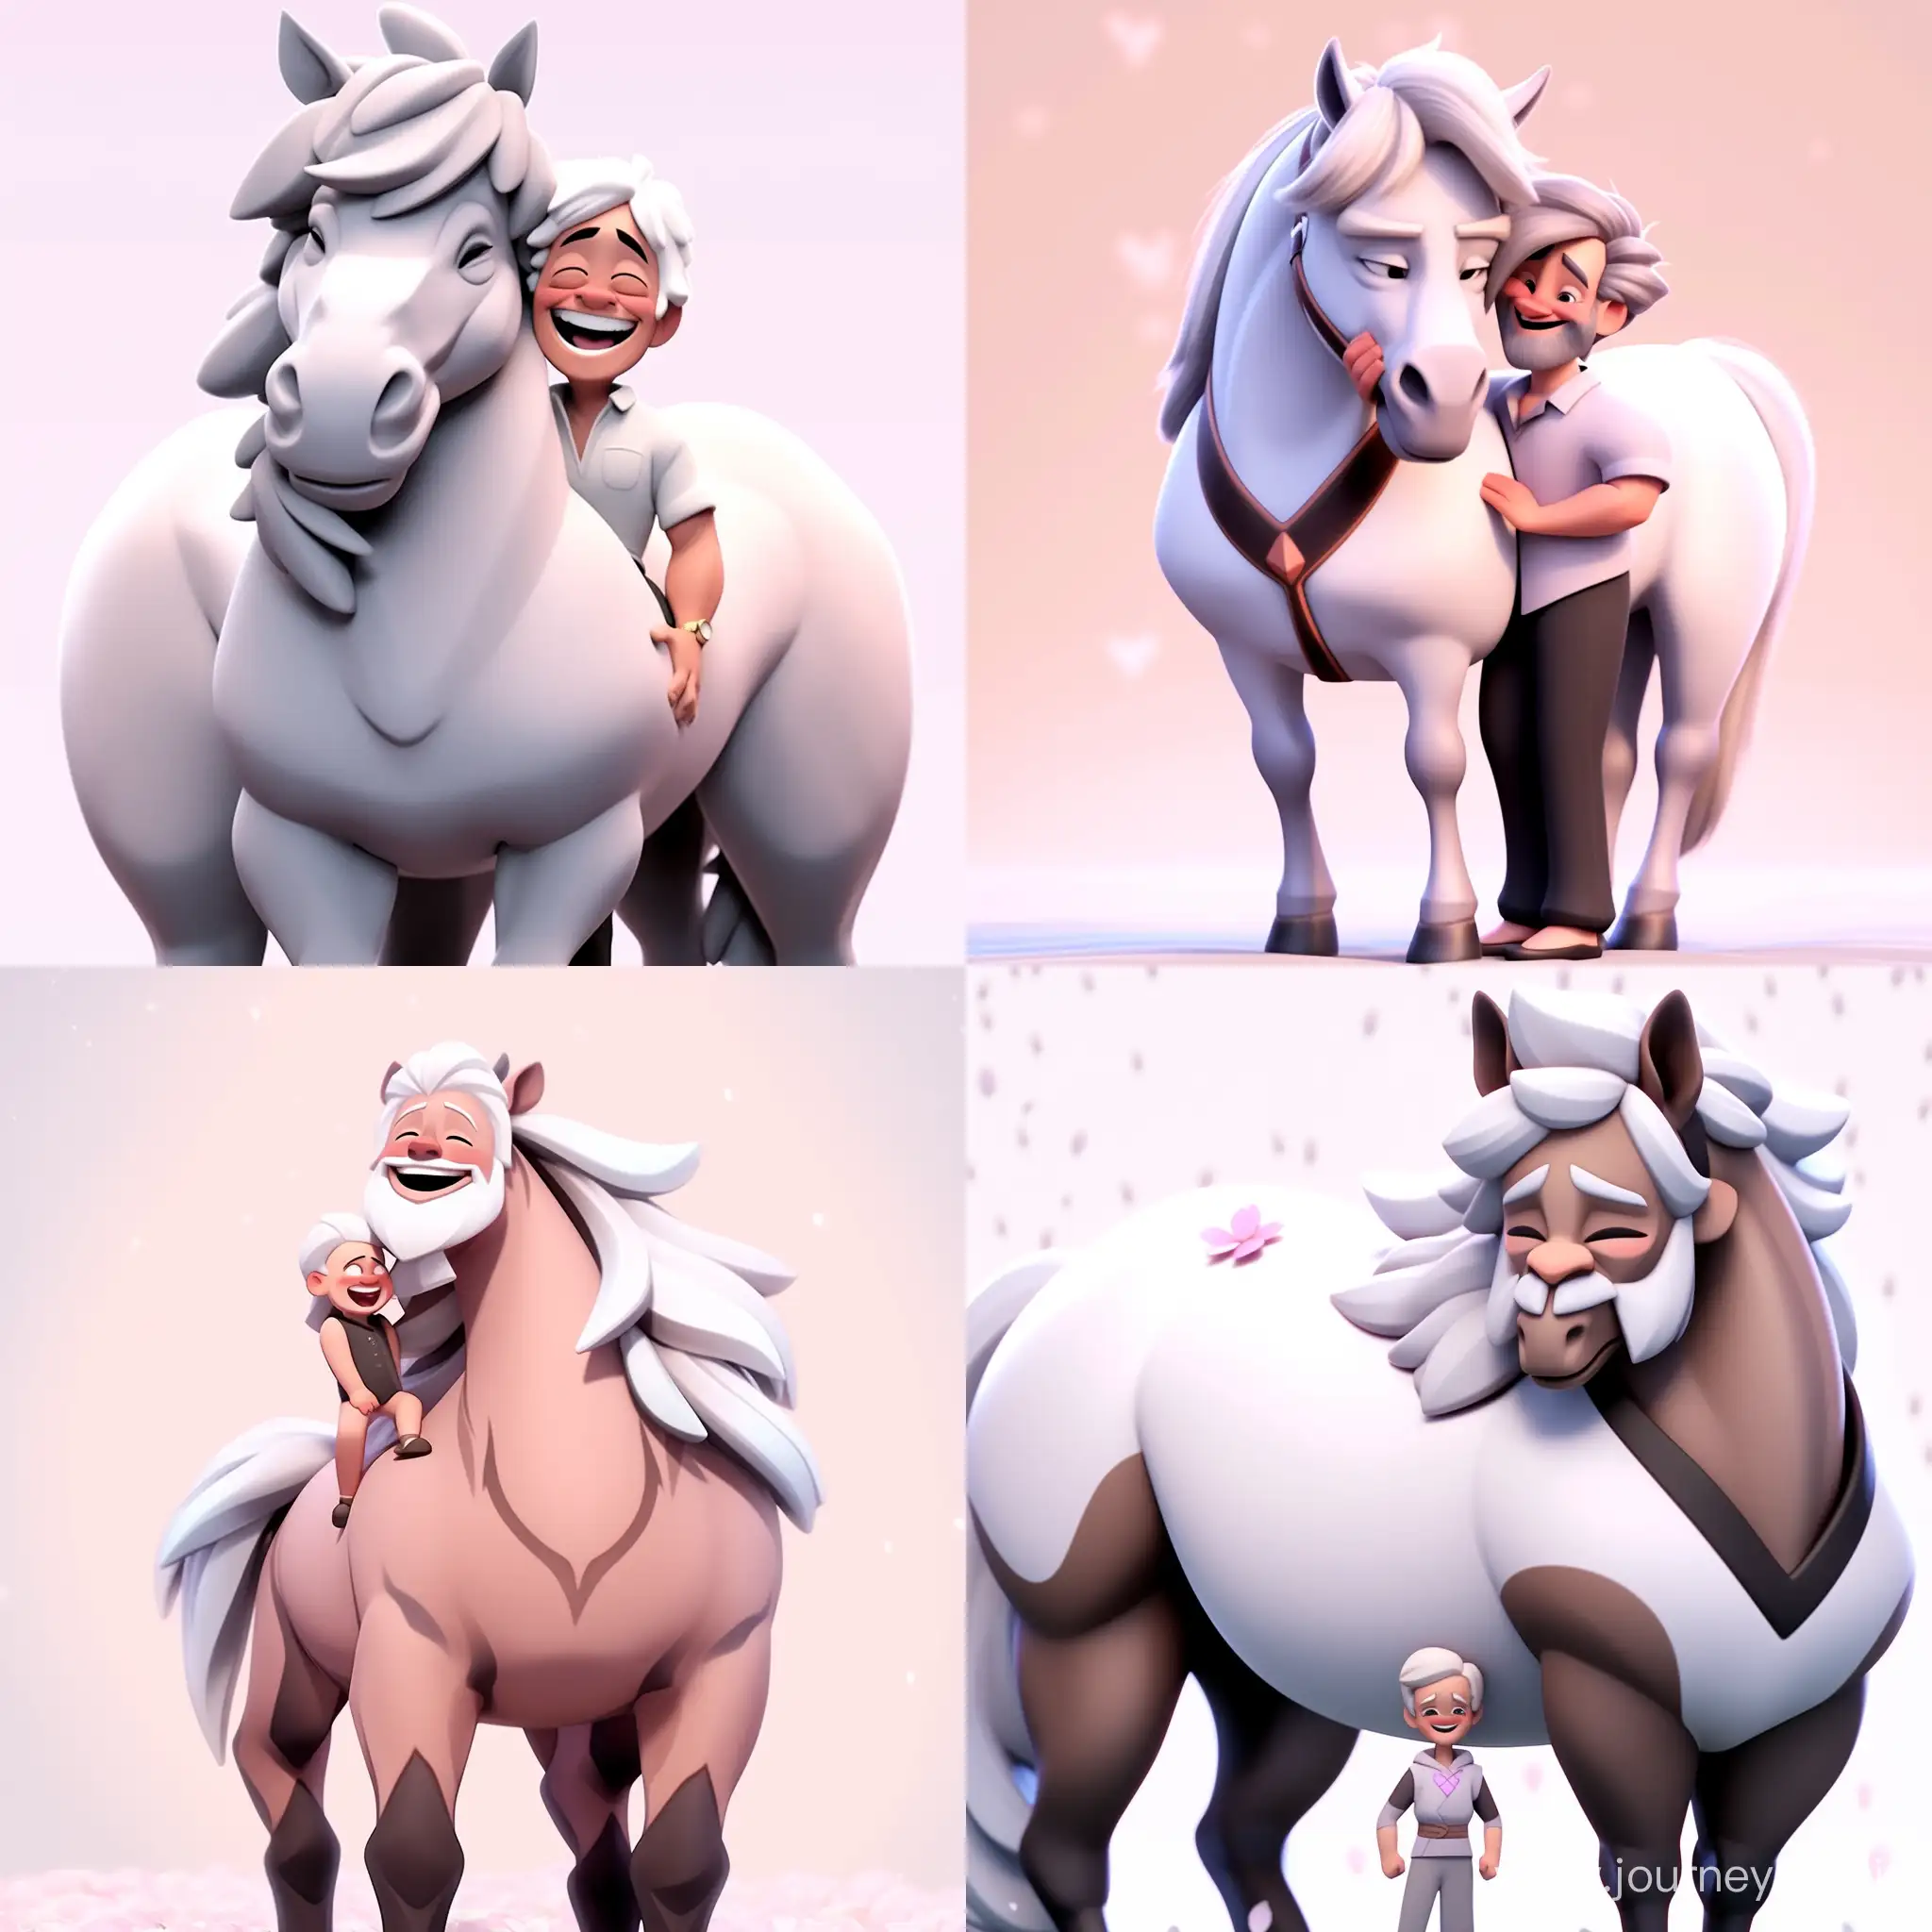 Adorable-WhiteHaired-Boy-Centaur-in-Cinematic-Anime-Style